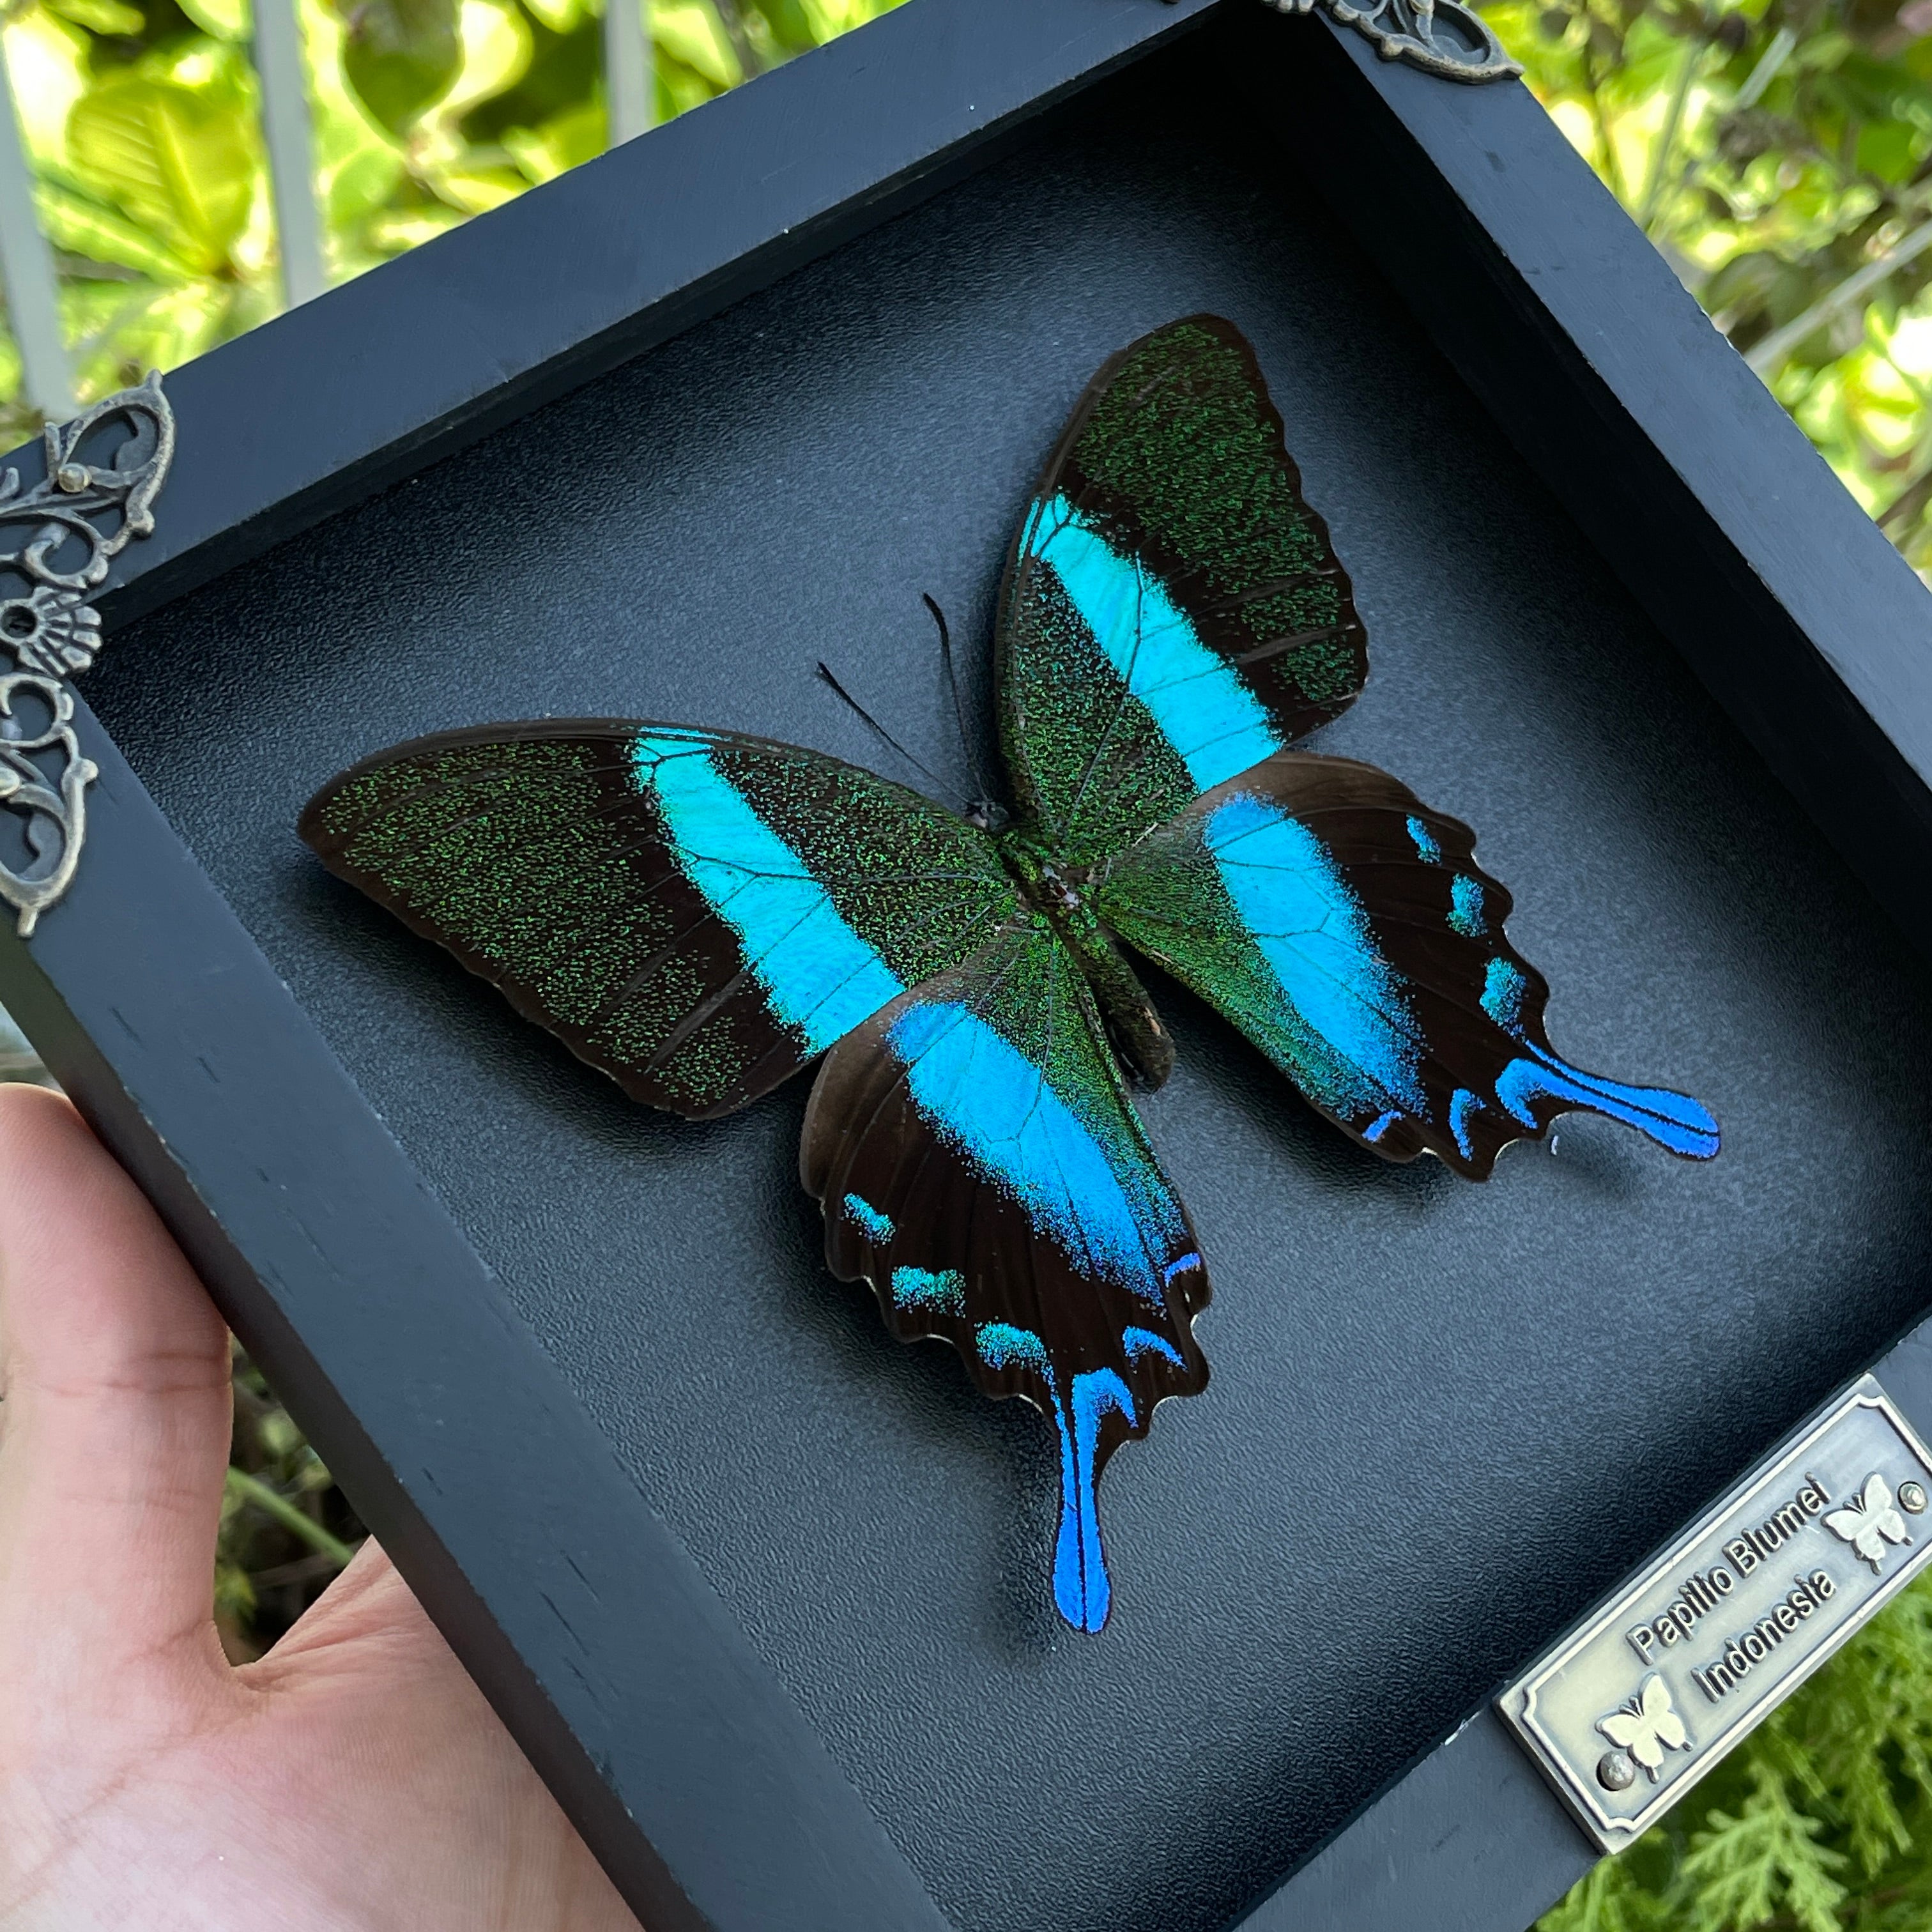 Real Framed Emerald Peacock Butterfly Moth Dead Insect Dried Shadow Box Frame Taxidermy Specimen Display Oddity Curiosities Wall Hanging Collection K16-23-DE